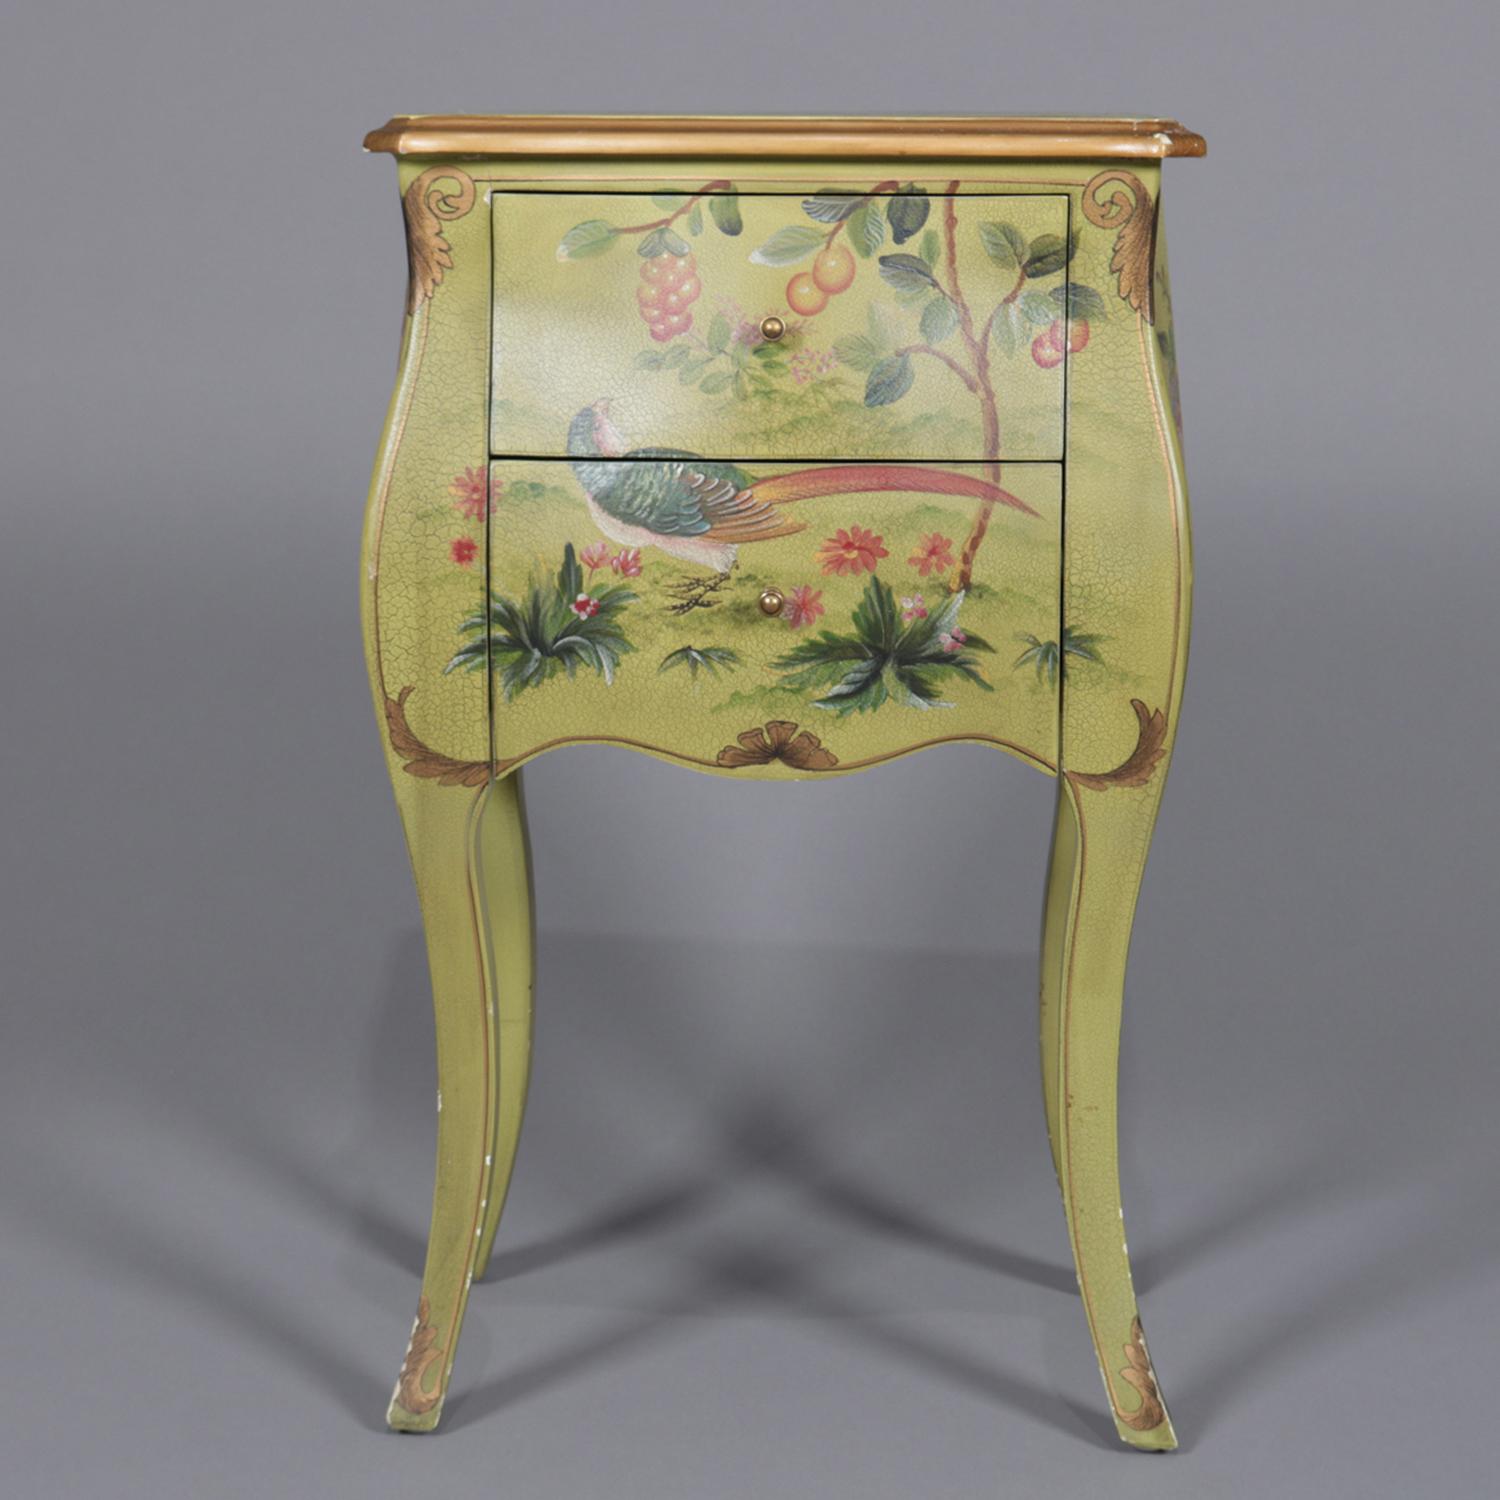 Wood French Provincial Floral Painted and Gilt Bombe Stand with Roses and Pheasant